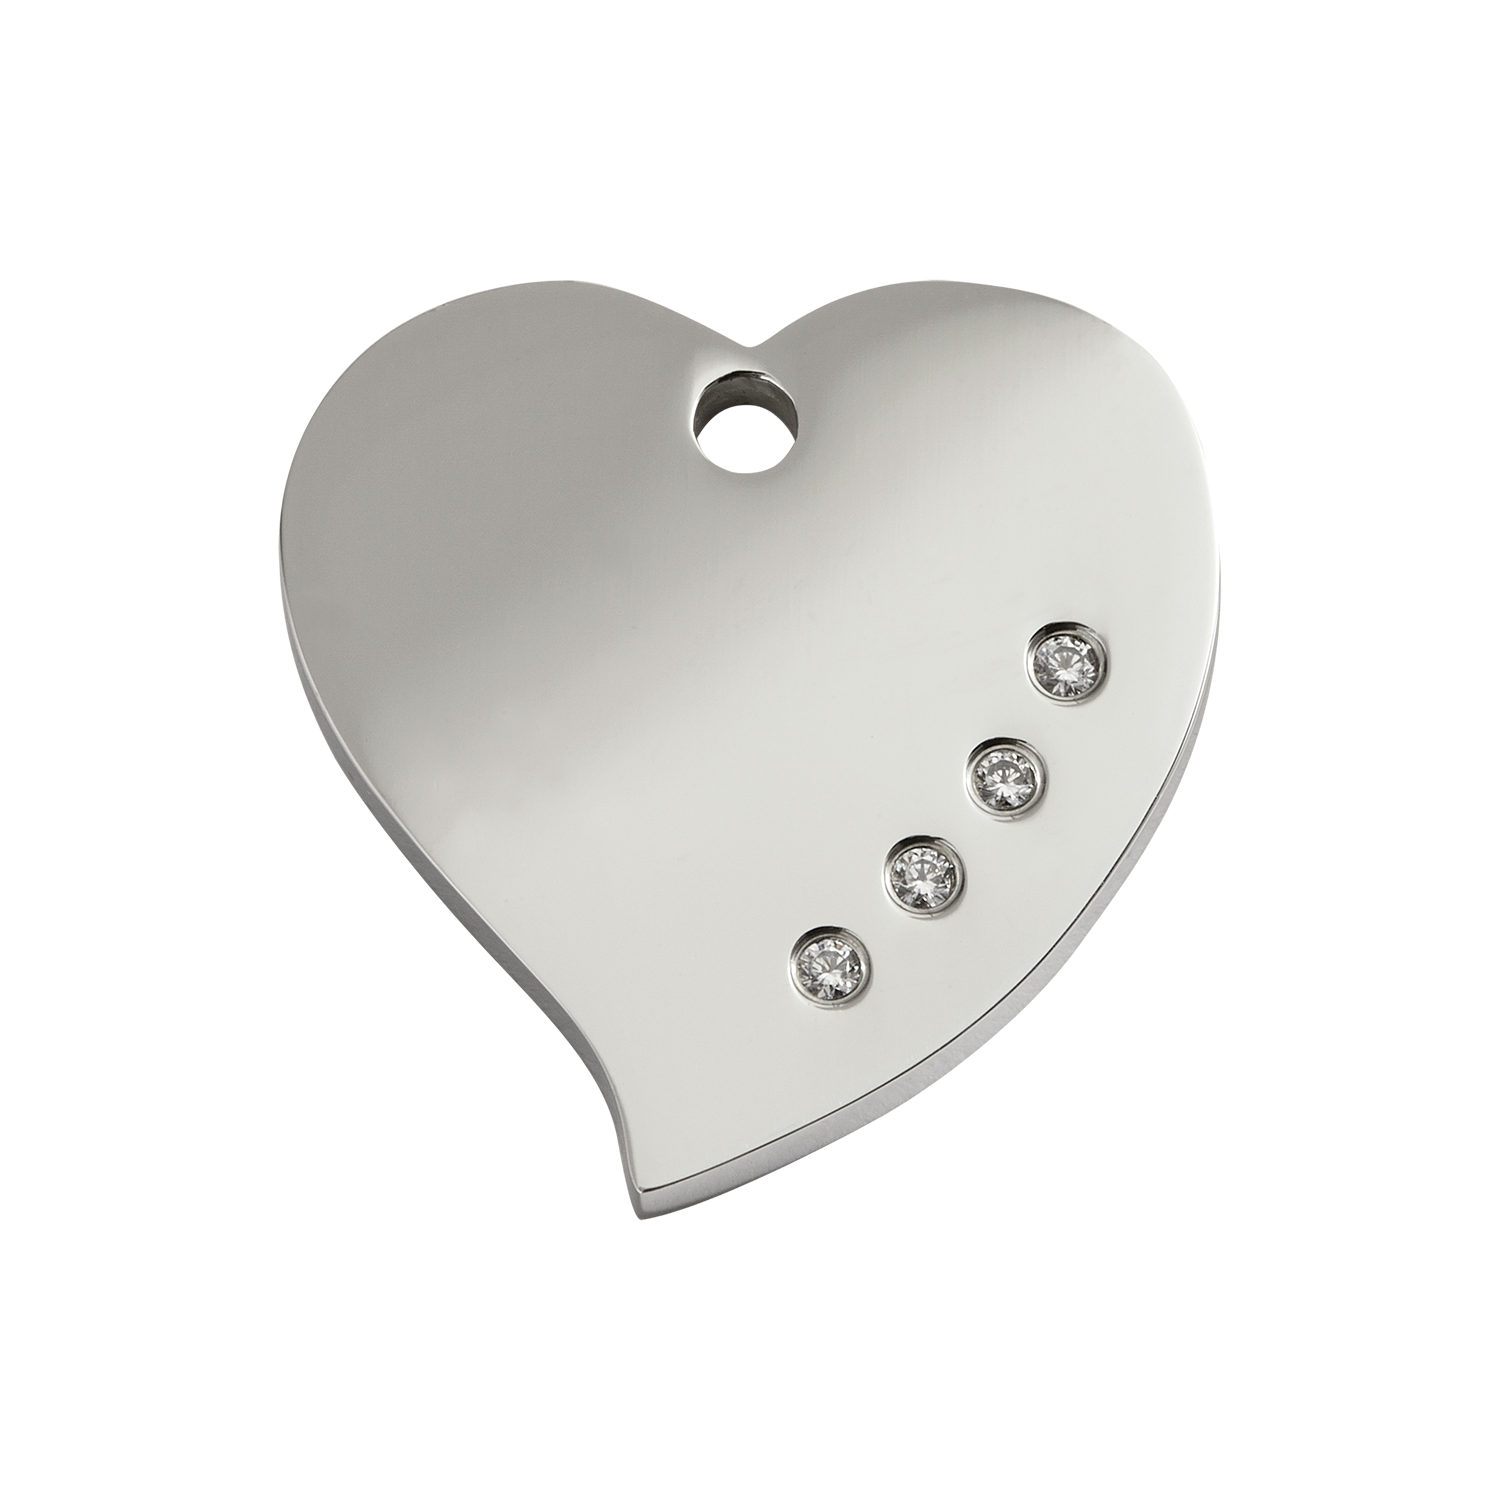 Heart Medium Diamante Polished Stainless Steel Tag>